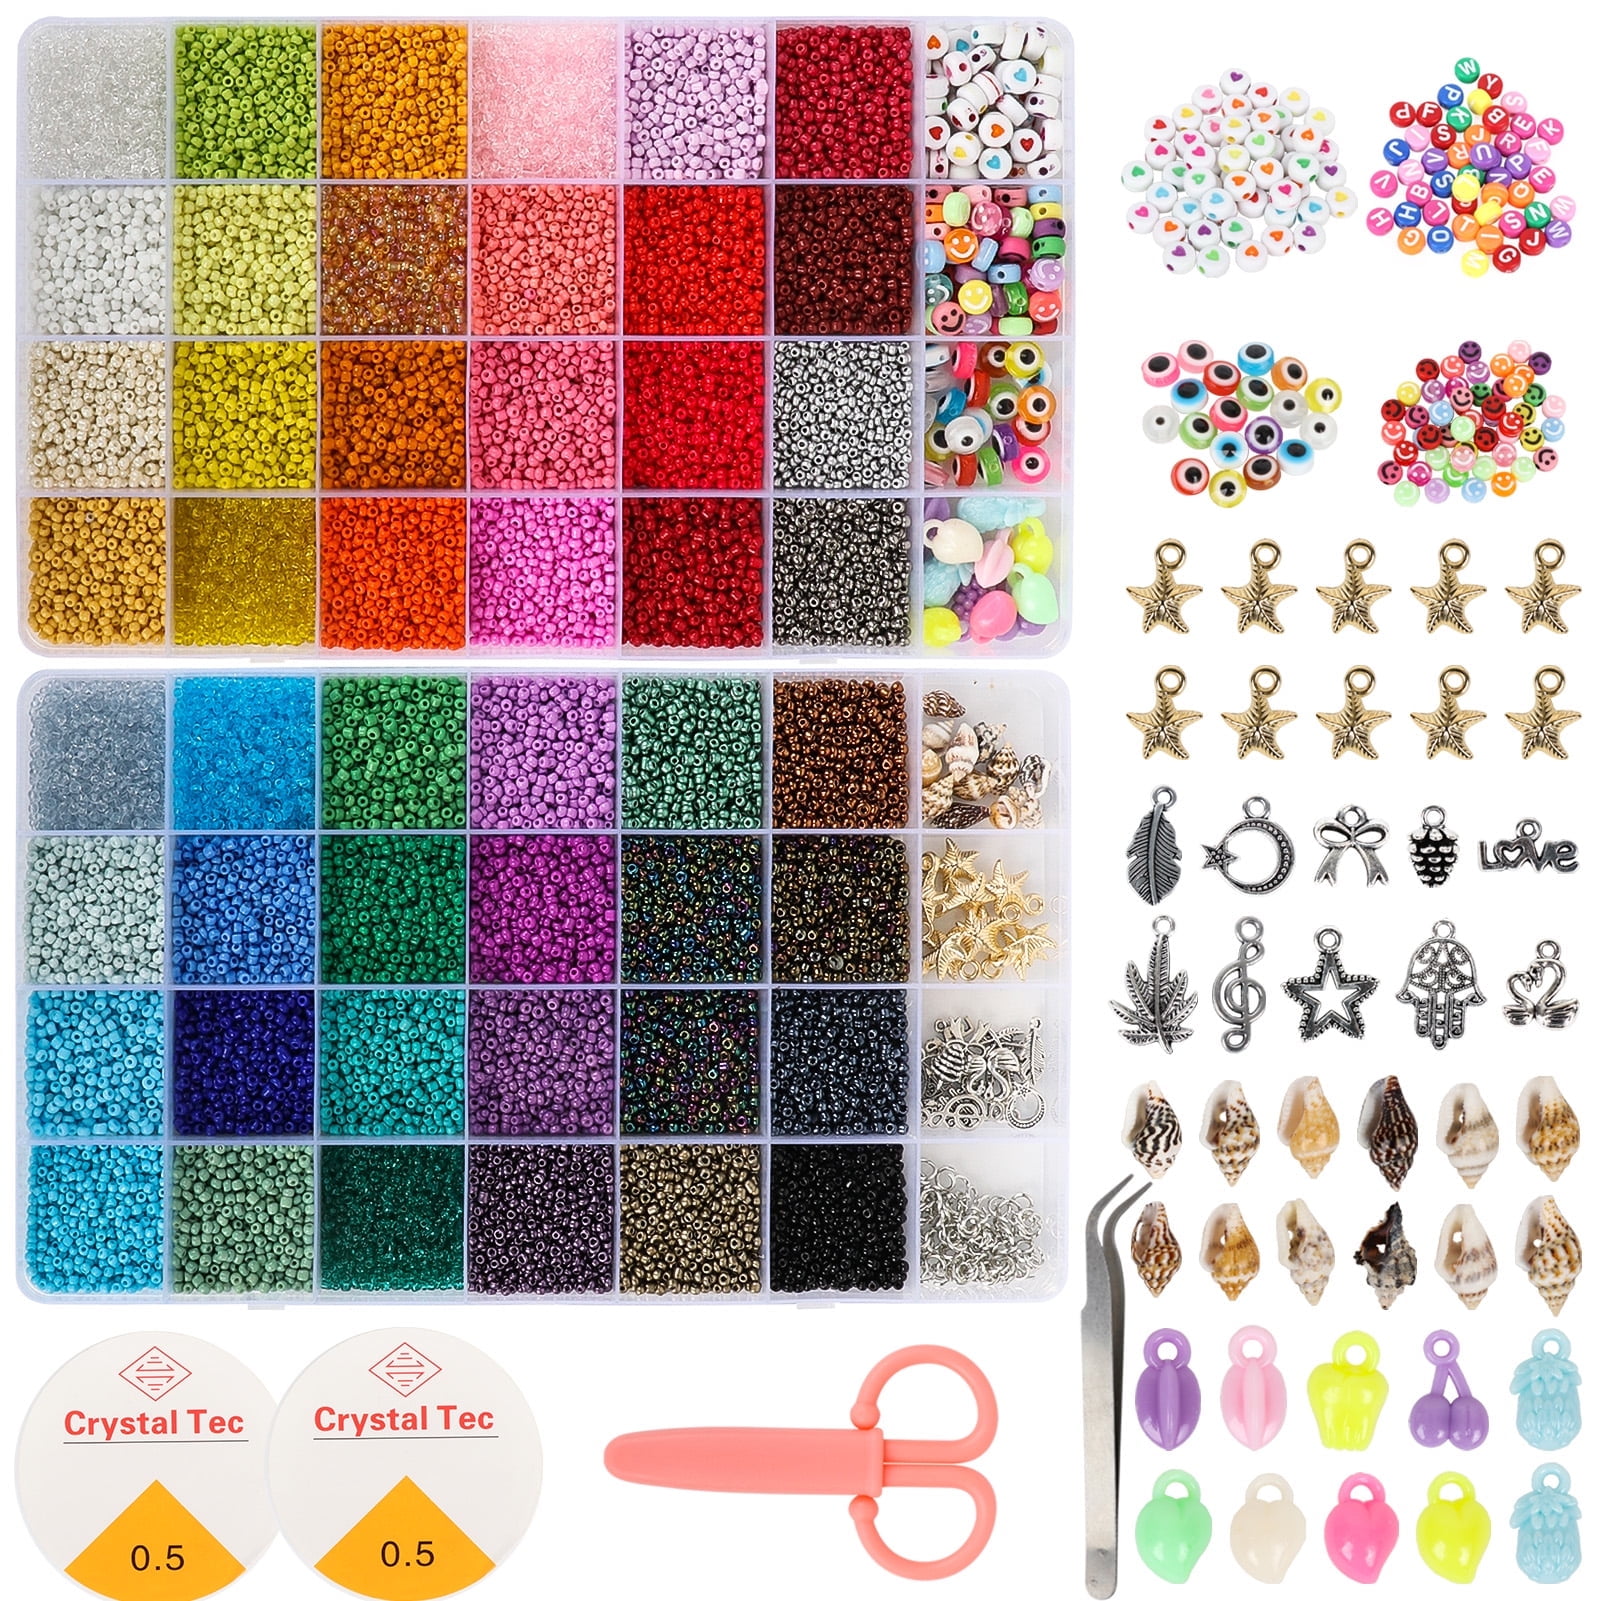 Stylish 2mm glass beads for Crafting 